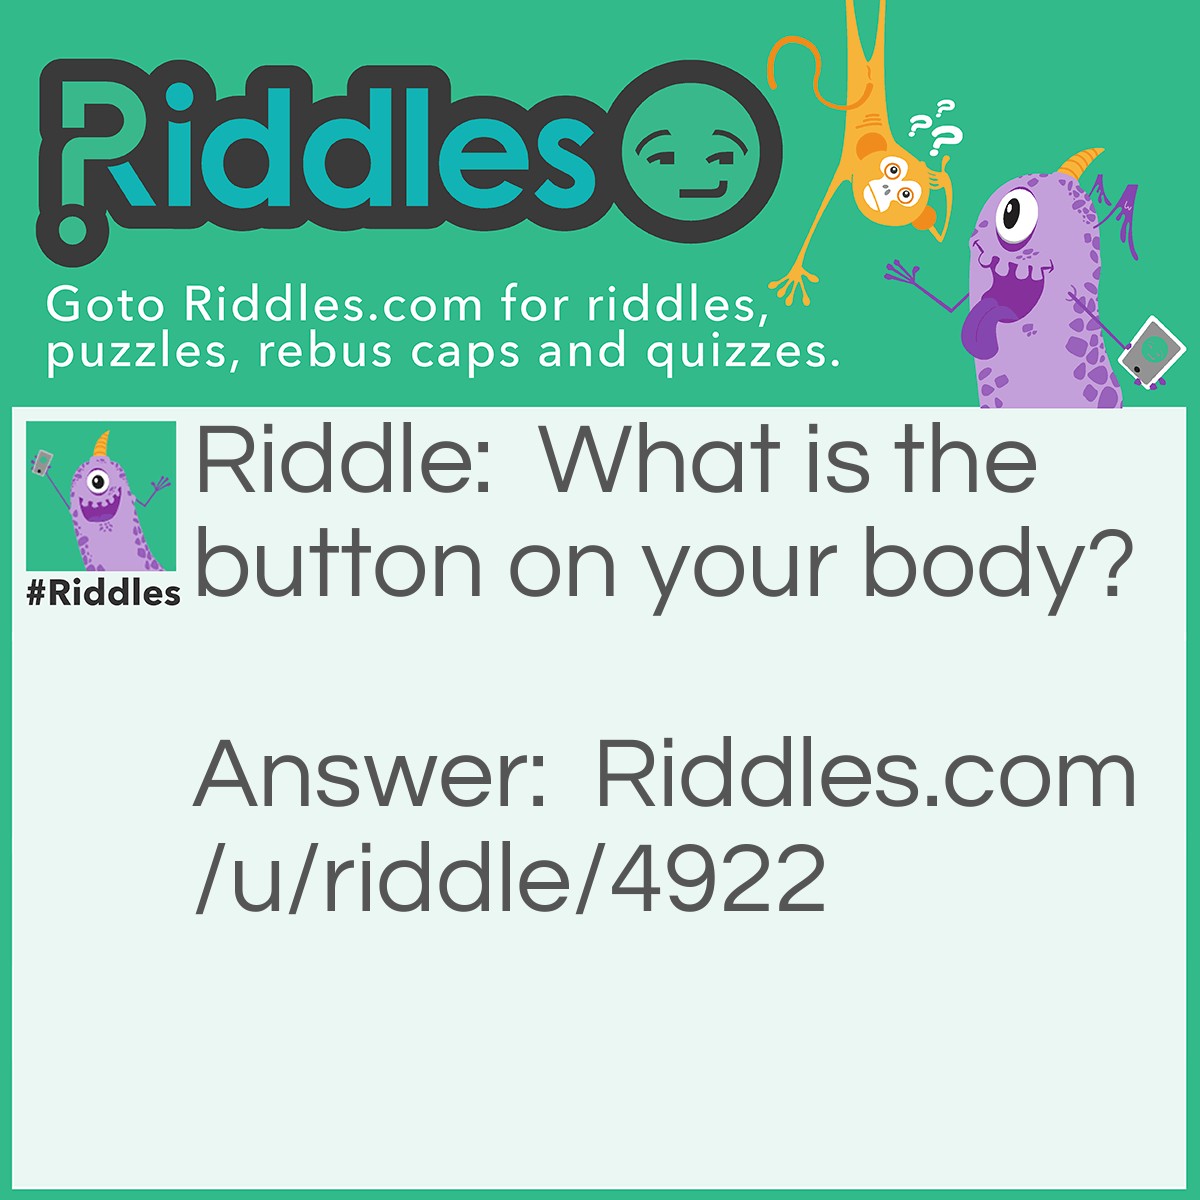 Riddle: What is the button on your body? Answer: Belly button.